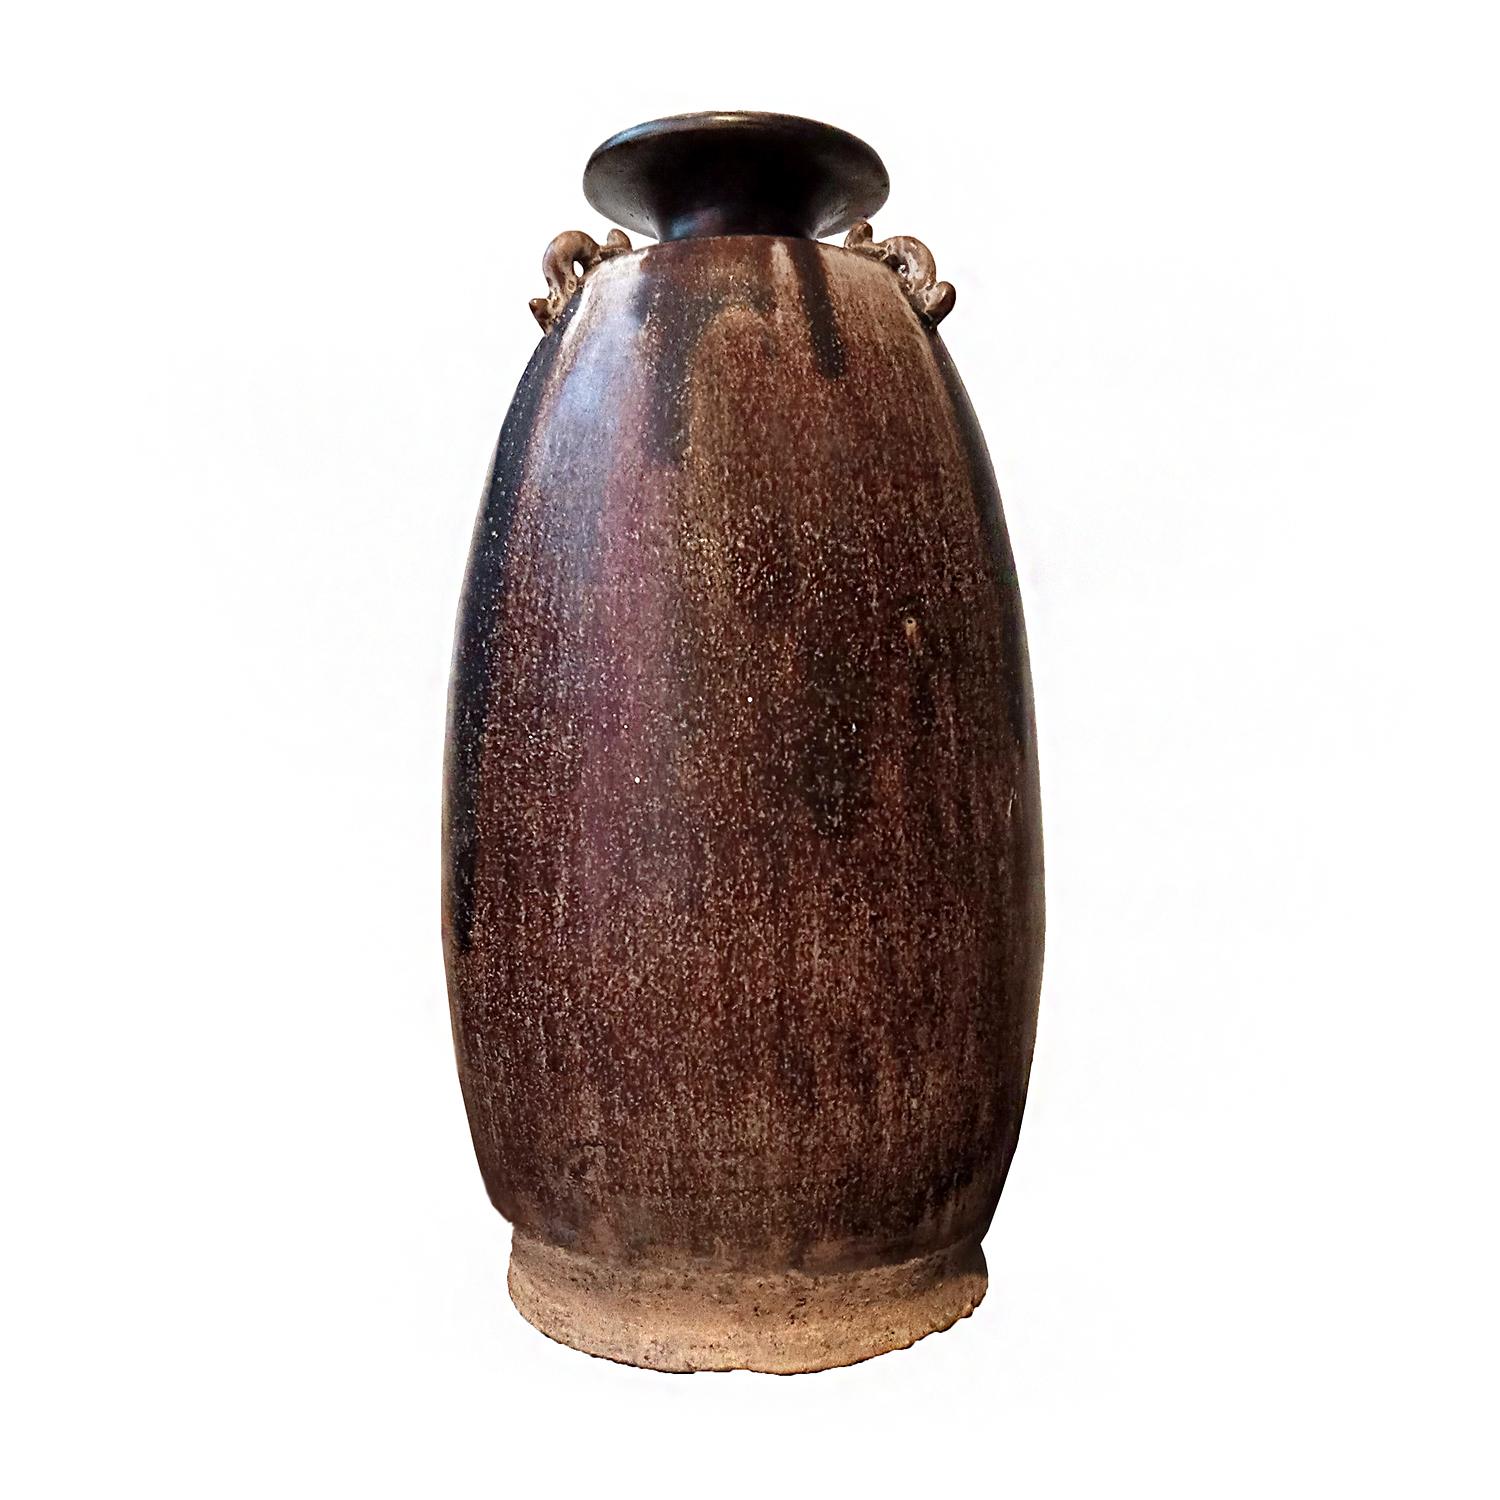 A tall brown ceramic vase / urn with brown glaze, with small loop handles on its neck. Hand-crafted in Thailand, in the tradition of antique Thai earthenware. With its mottled brown glaze, this piece makes for a unique decorative piece in most